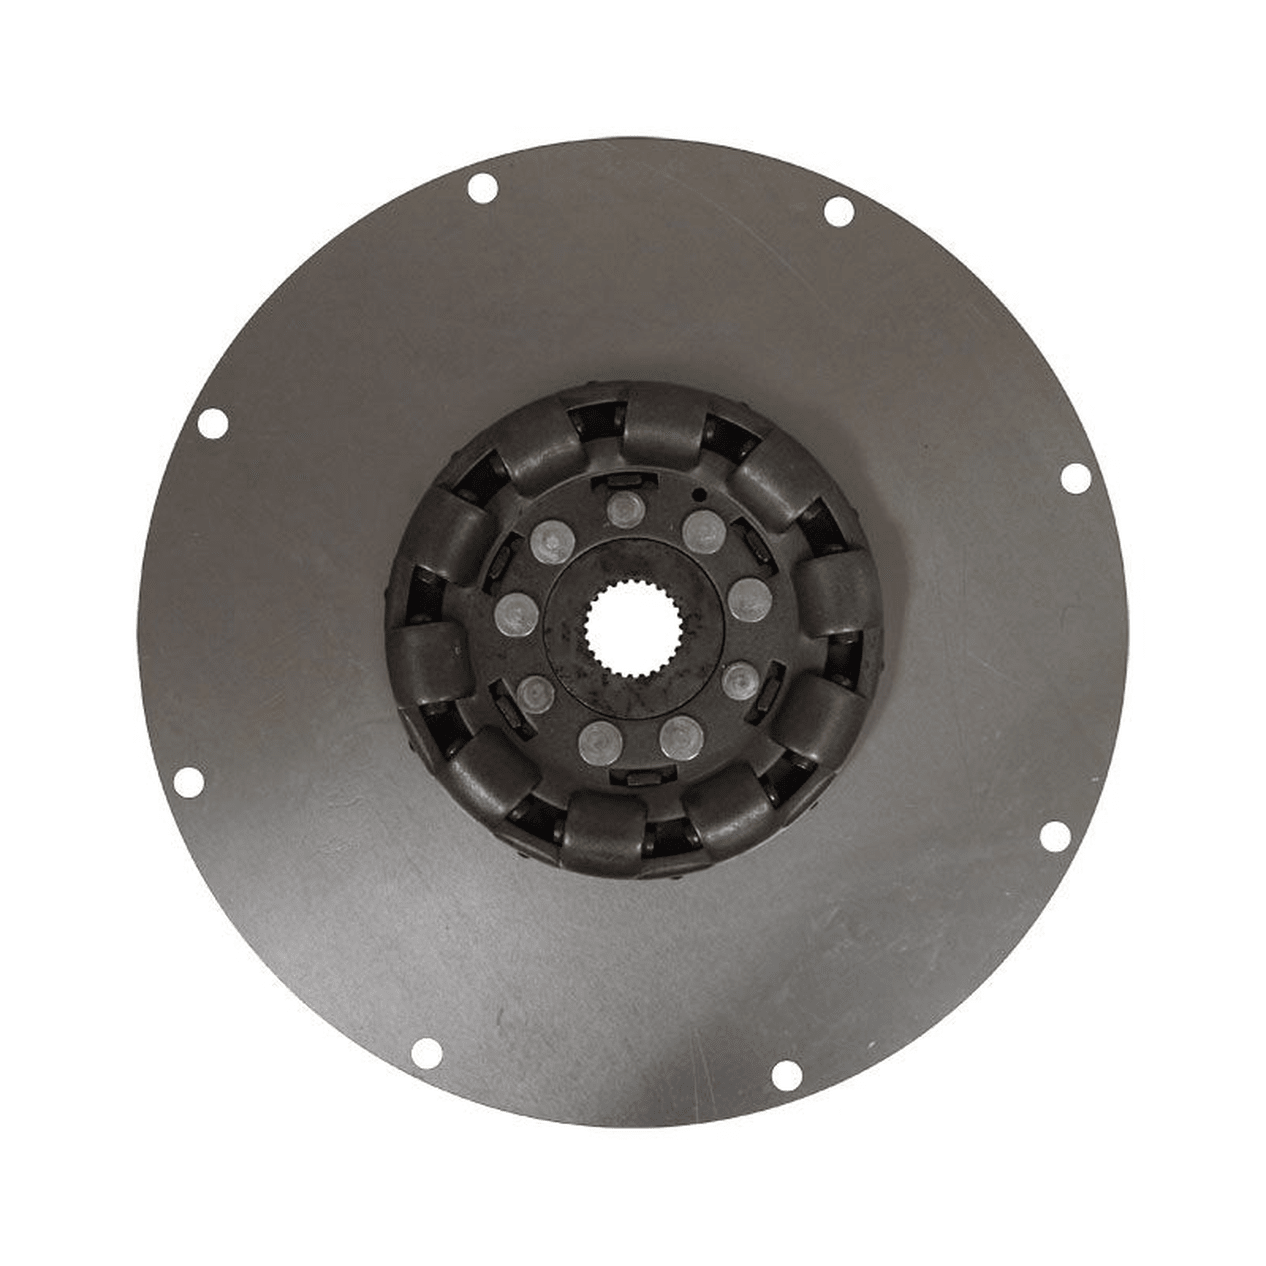 Straight View of Barr Marine Torsional Damper Drive Plate - 1004-650-001, Full Circle Plate